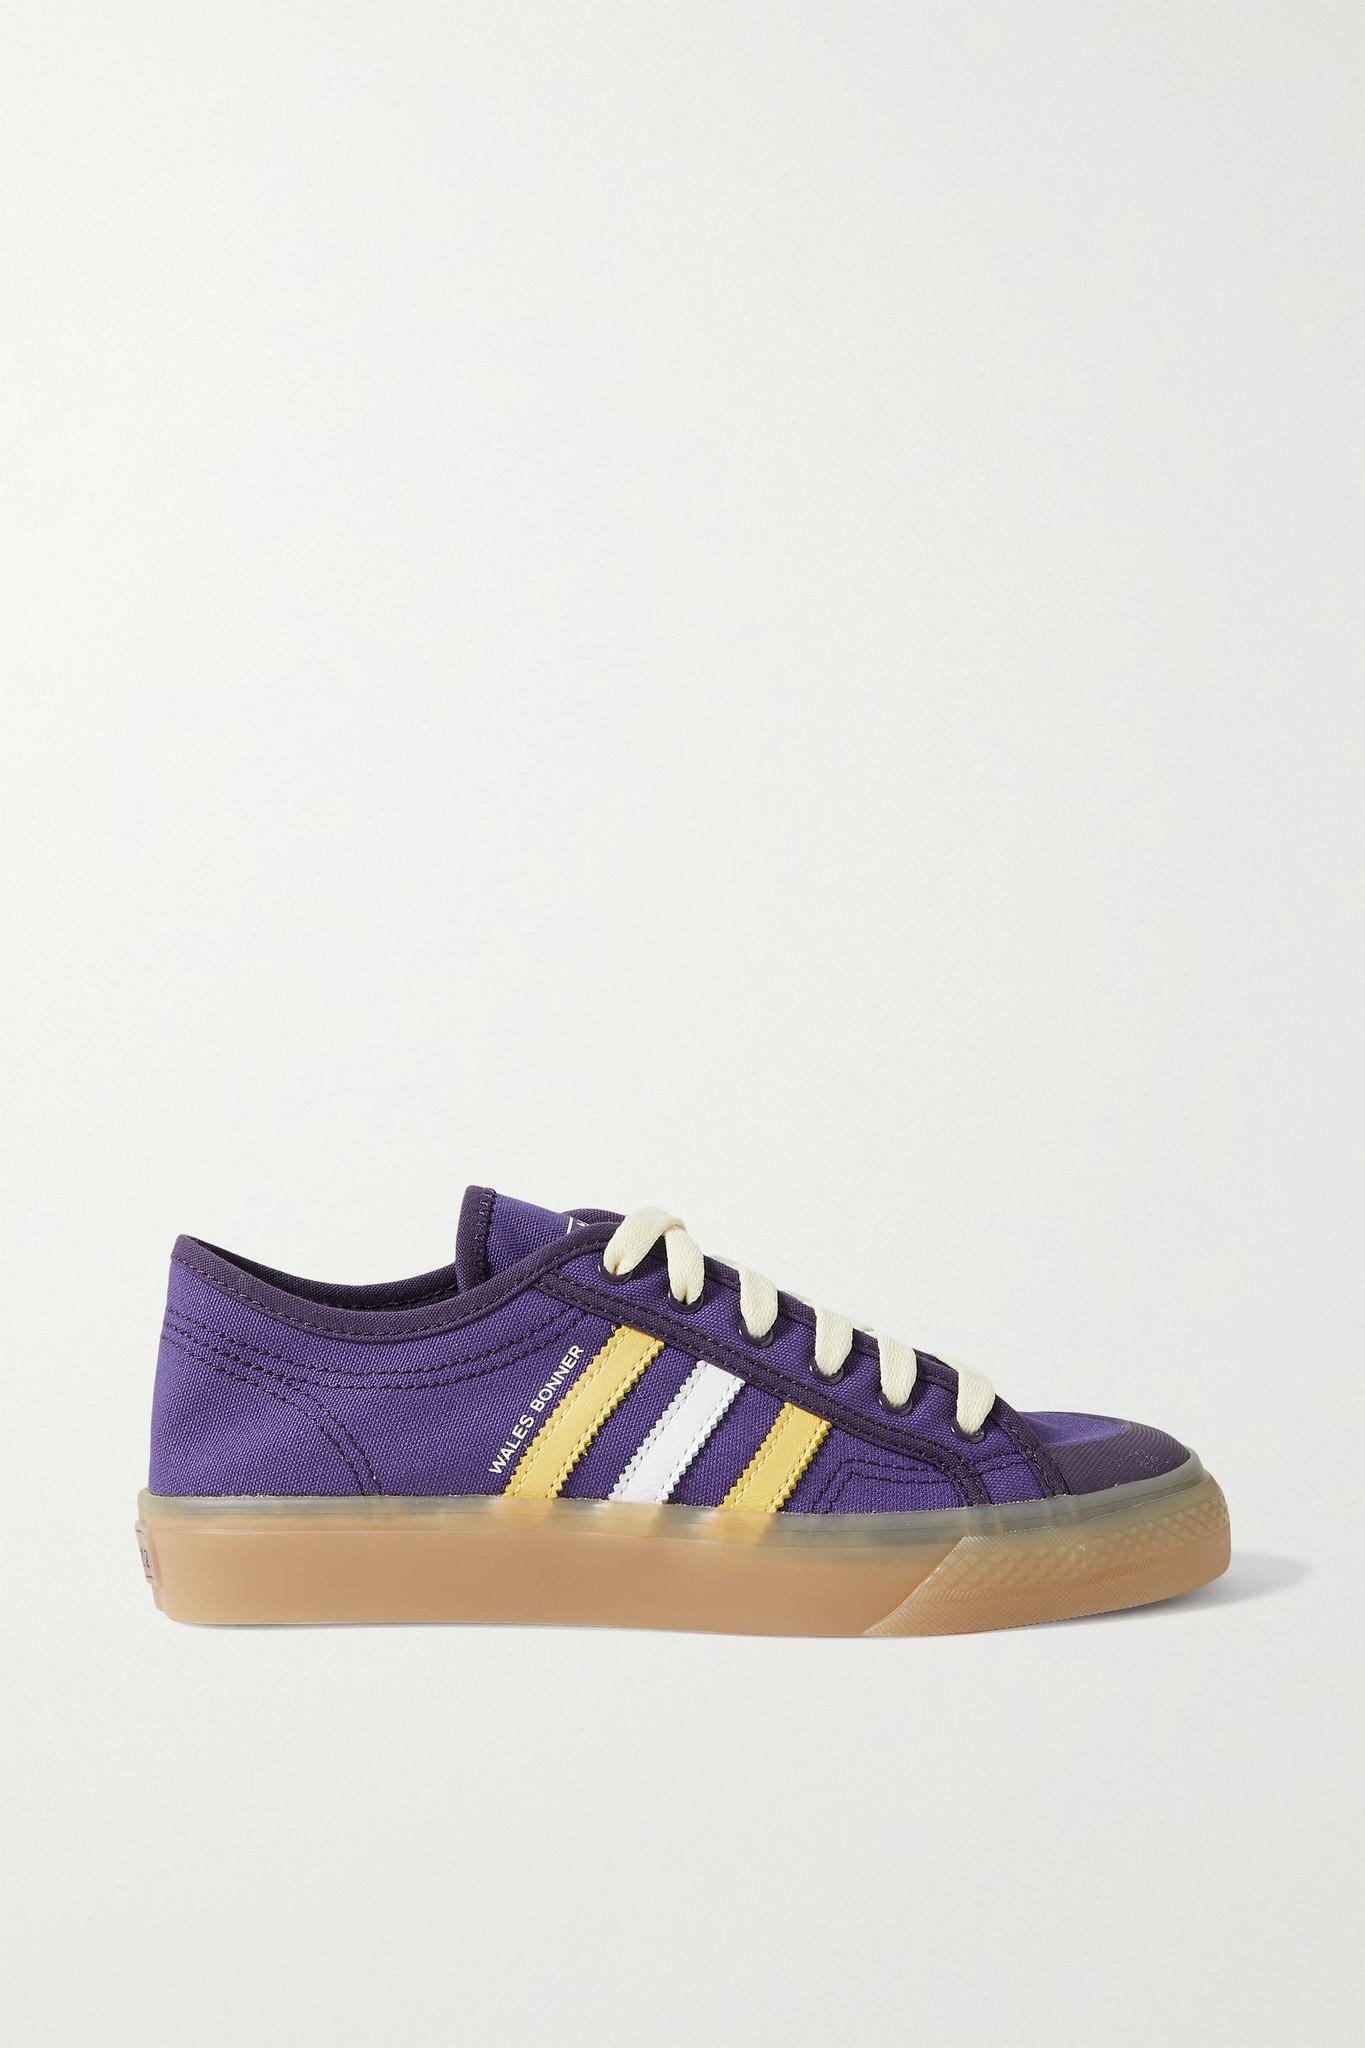 adidas Originals + Wales Bonner Nizza Leather-trimmed Canvas Sneakers in  Purple | Lyst